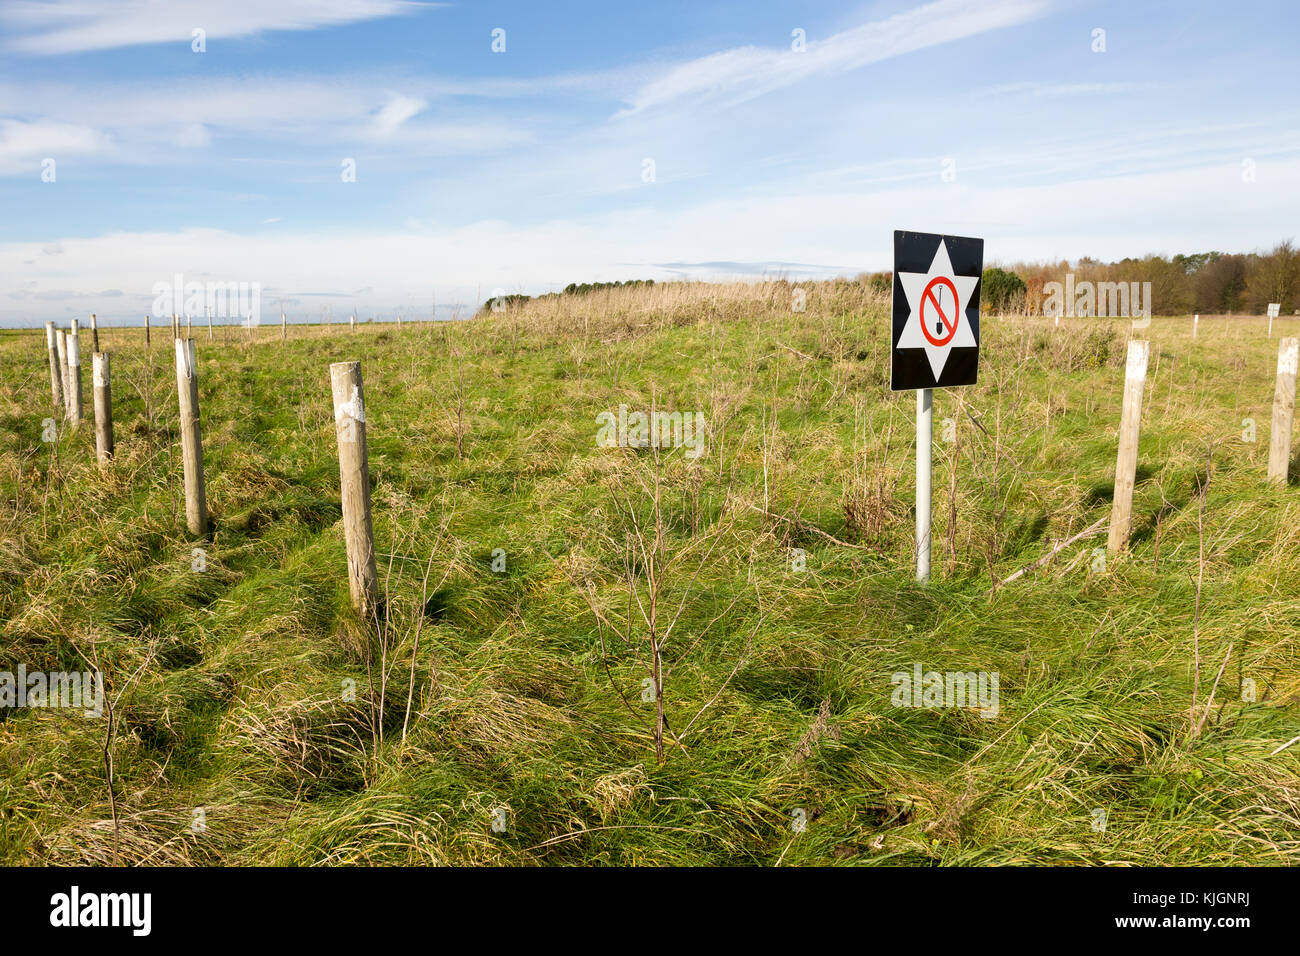 Protective sign warning against digging at an archaeological site on Salisbury Plain, Wiltshire, England, UK Stock Photo